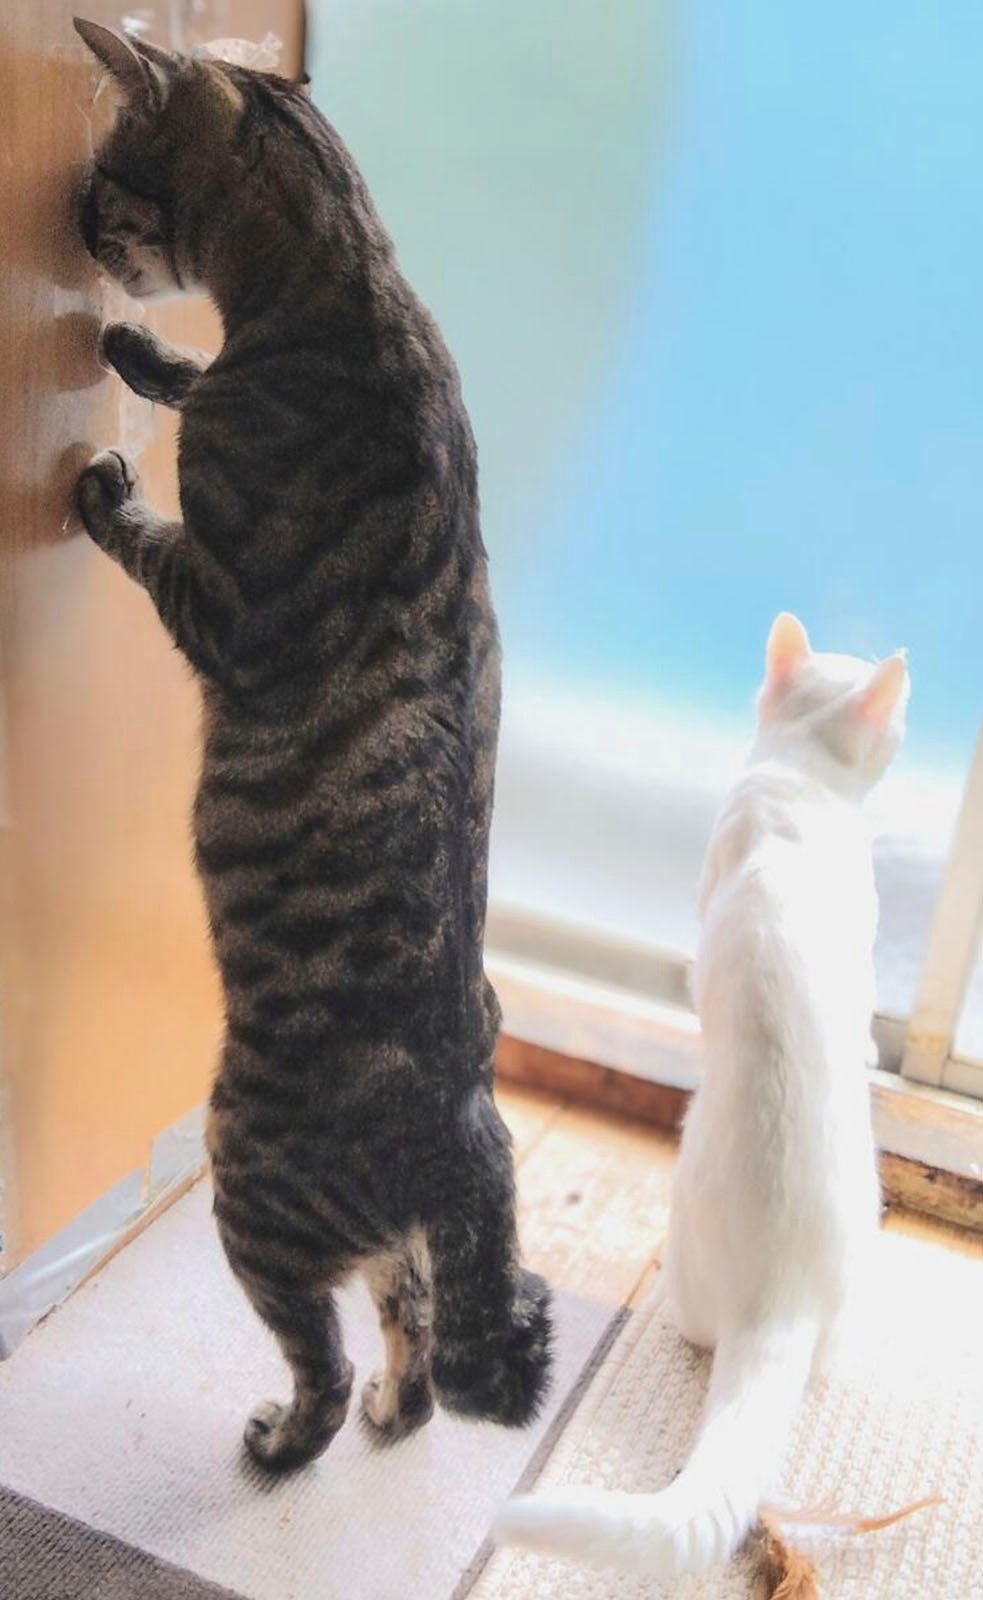 Two cats by a door; a striped cat stands on hind legs peeking outside, and a white cat sits beside it, both looking out a bright window.